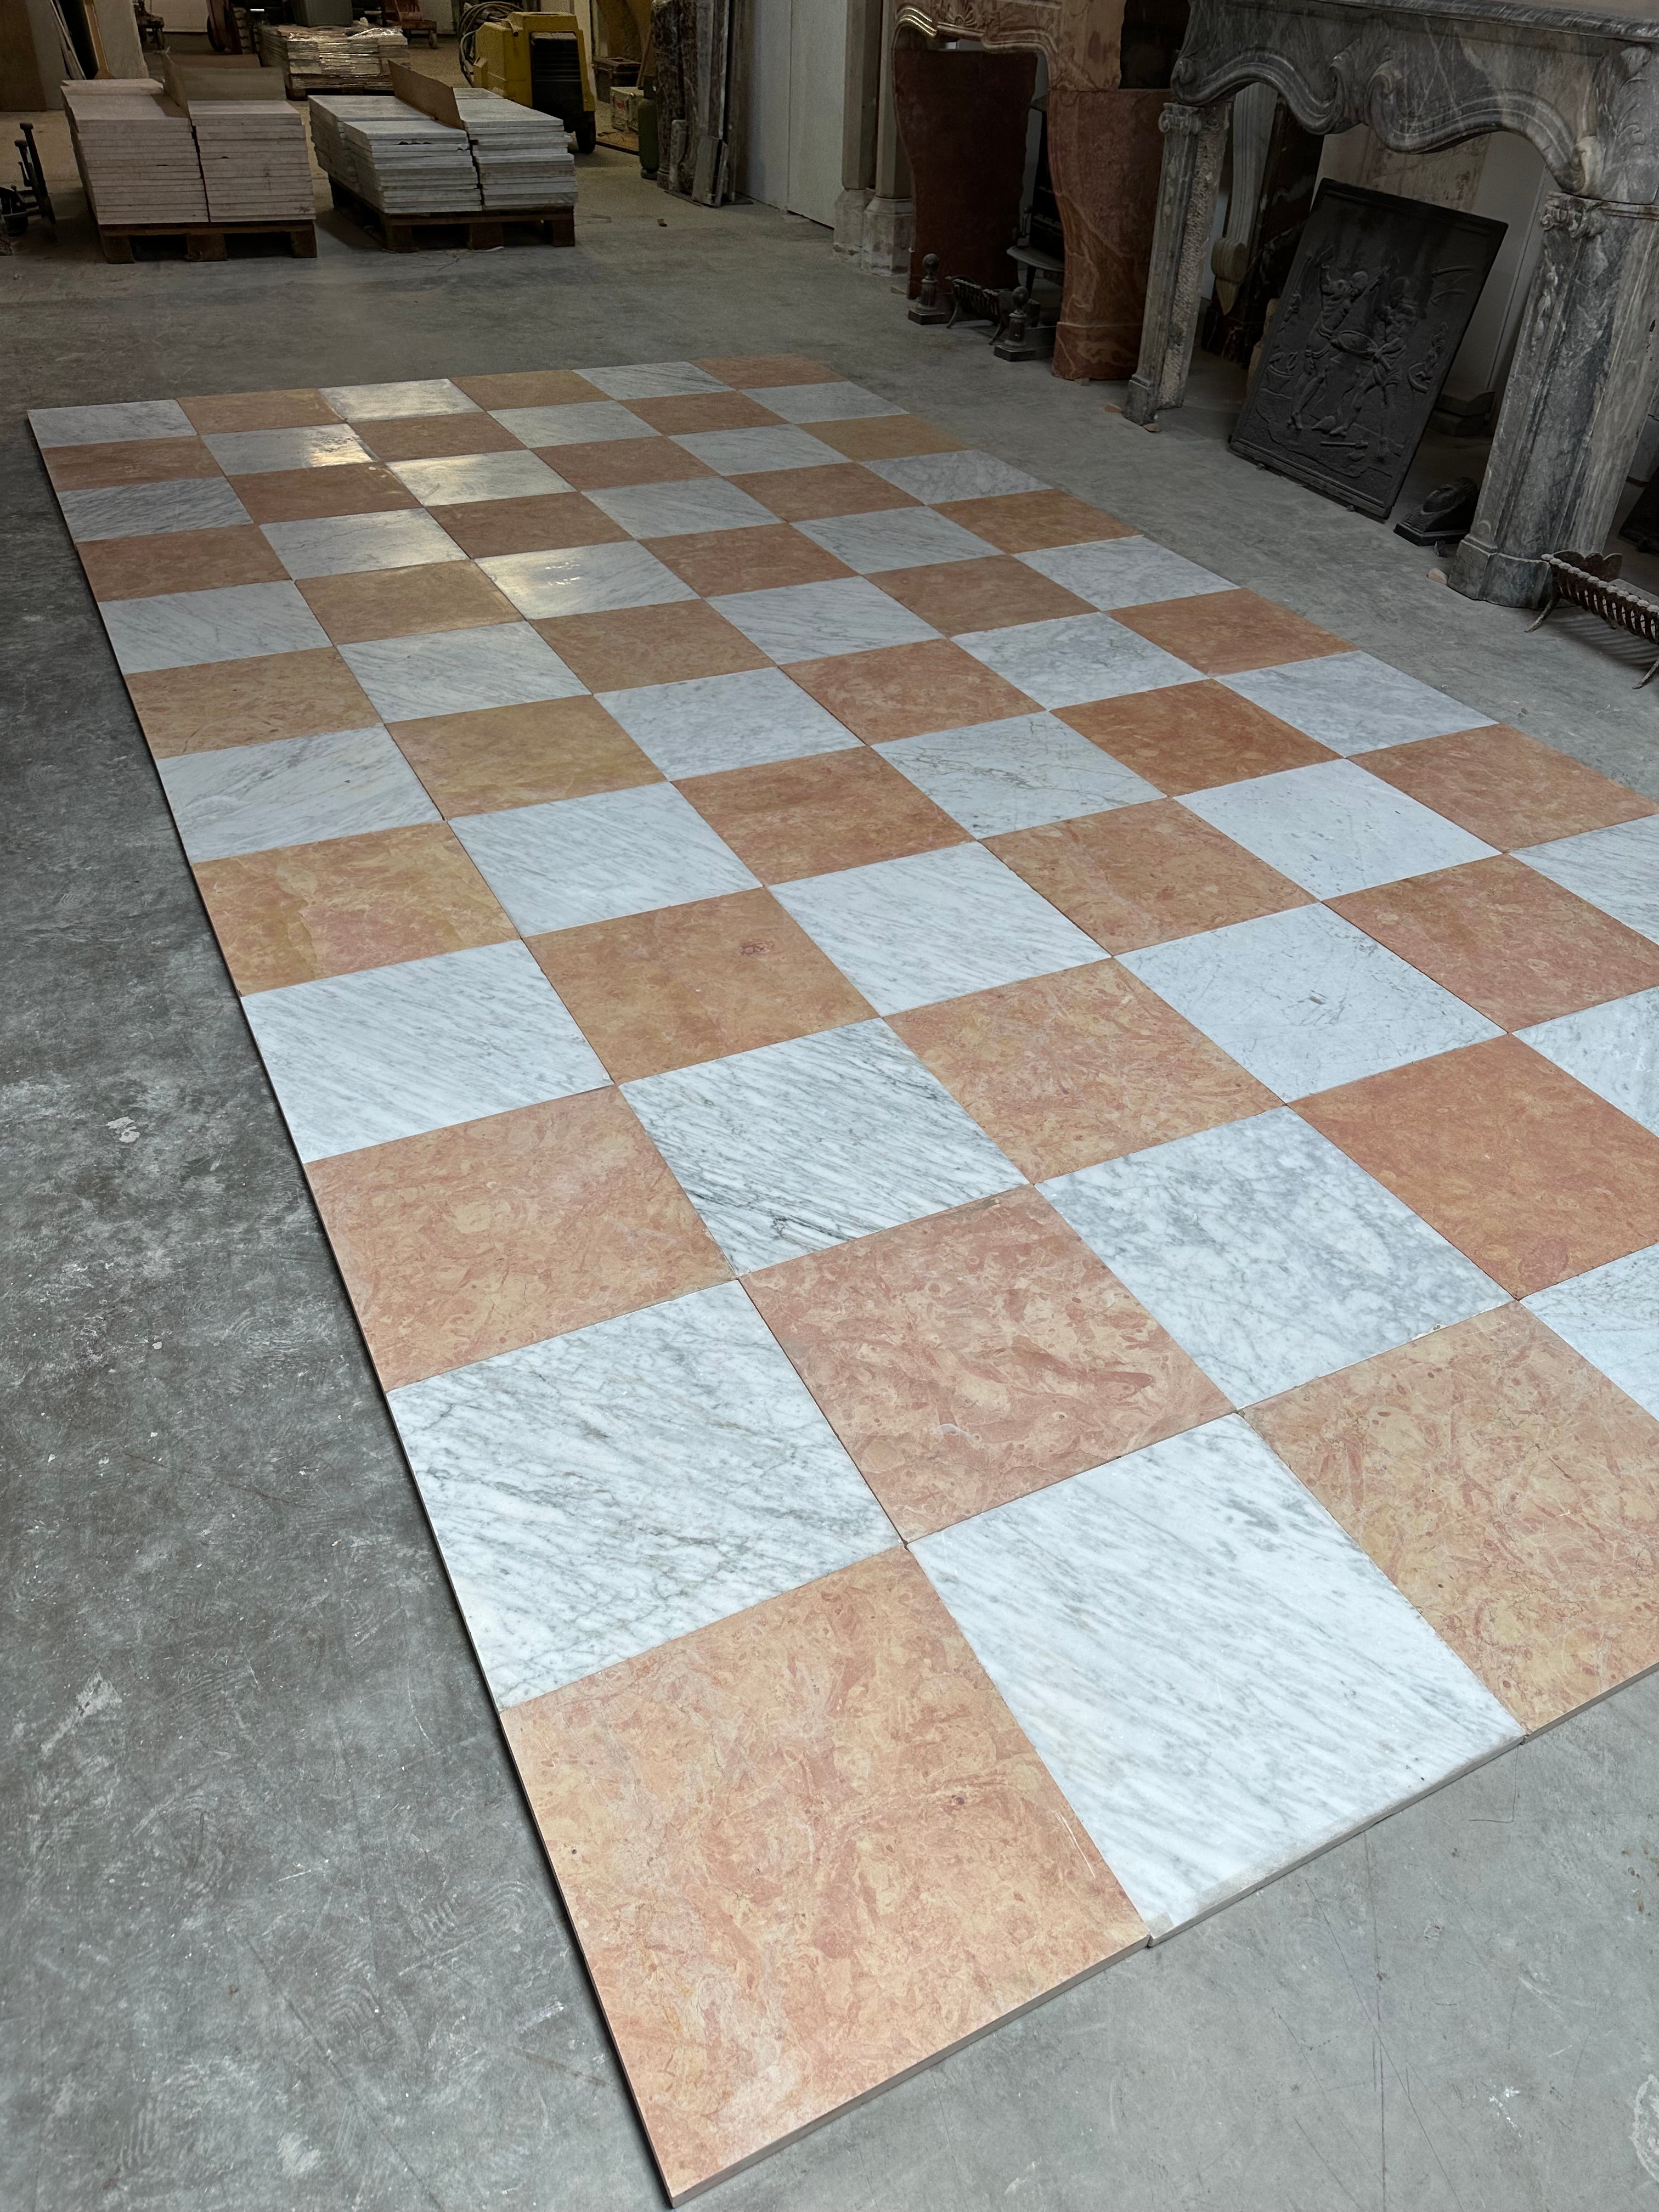 Amazing checkered Mid-Century Modern floor tiles.

Beautiful reclaimed floor from and amazing and famous design villa in the center of Holland.
The floor was carefully removed, cleaned and treated to get ready for its next life.

The vibrant